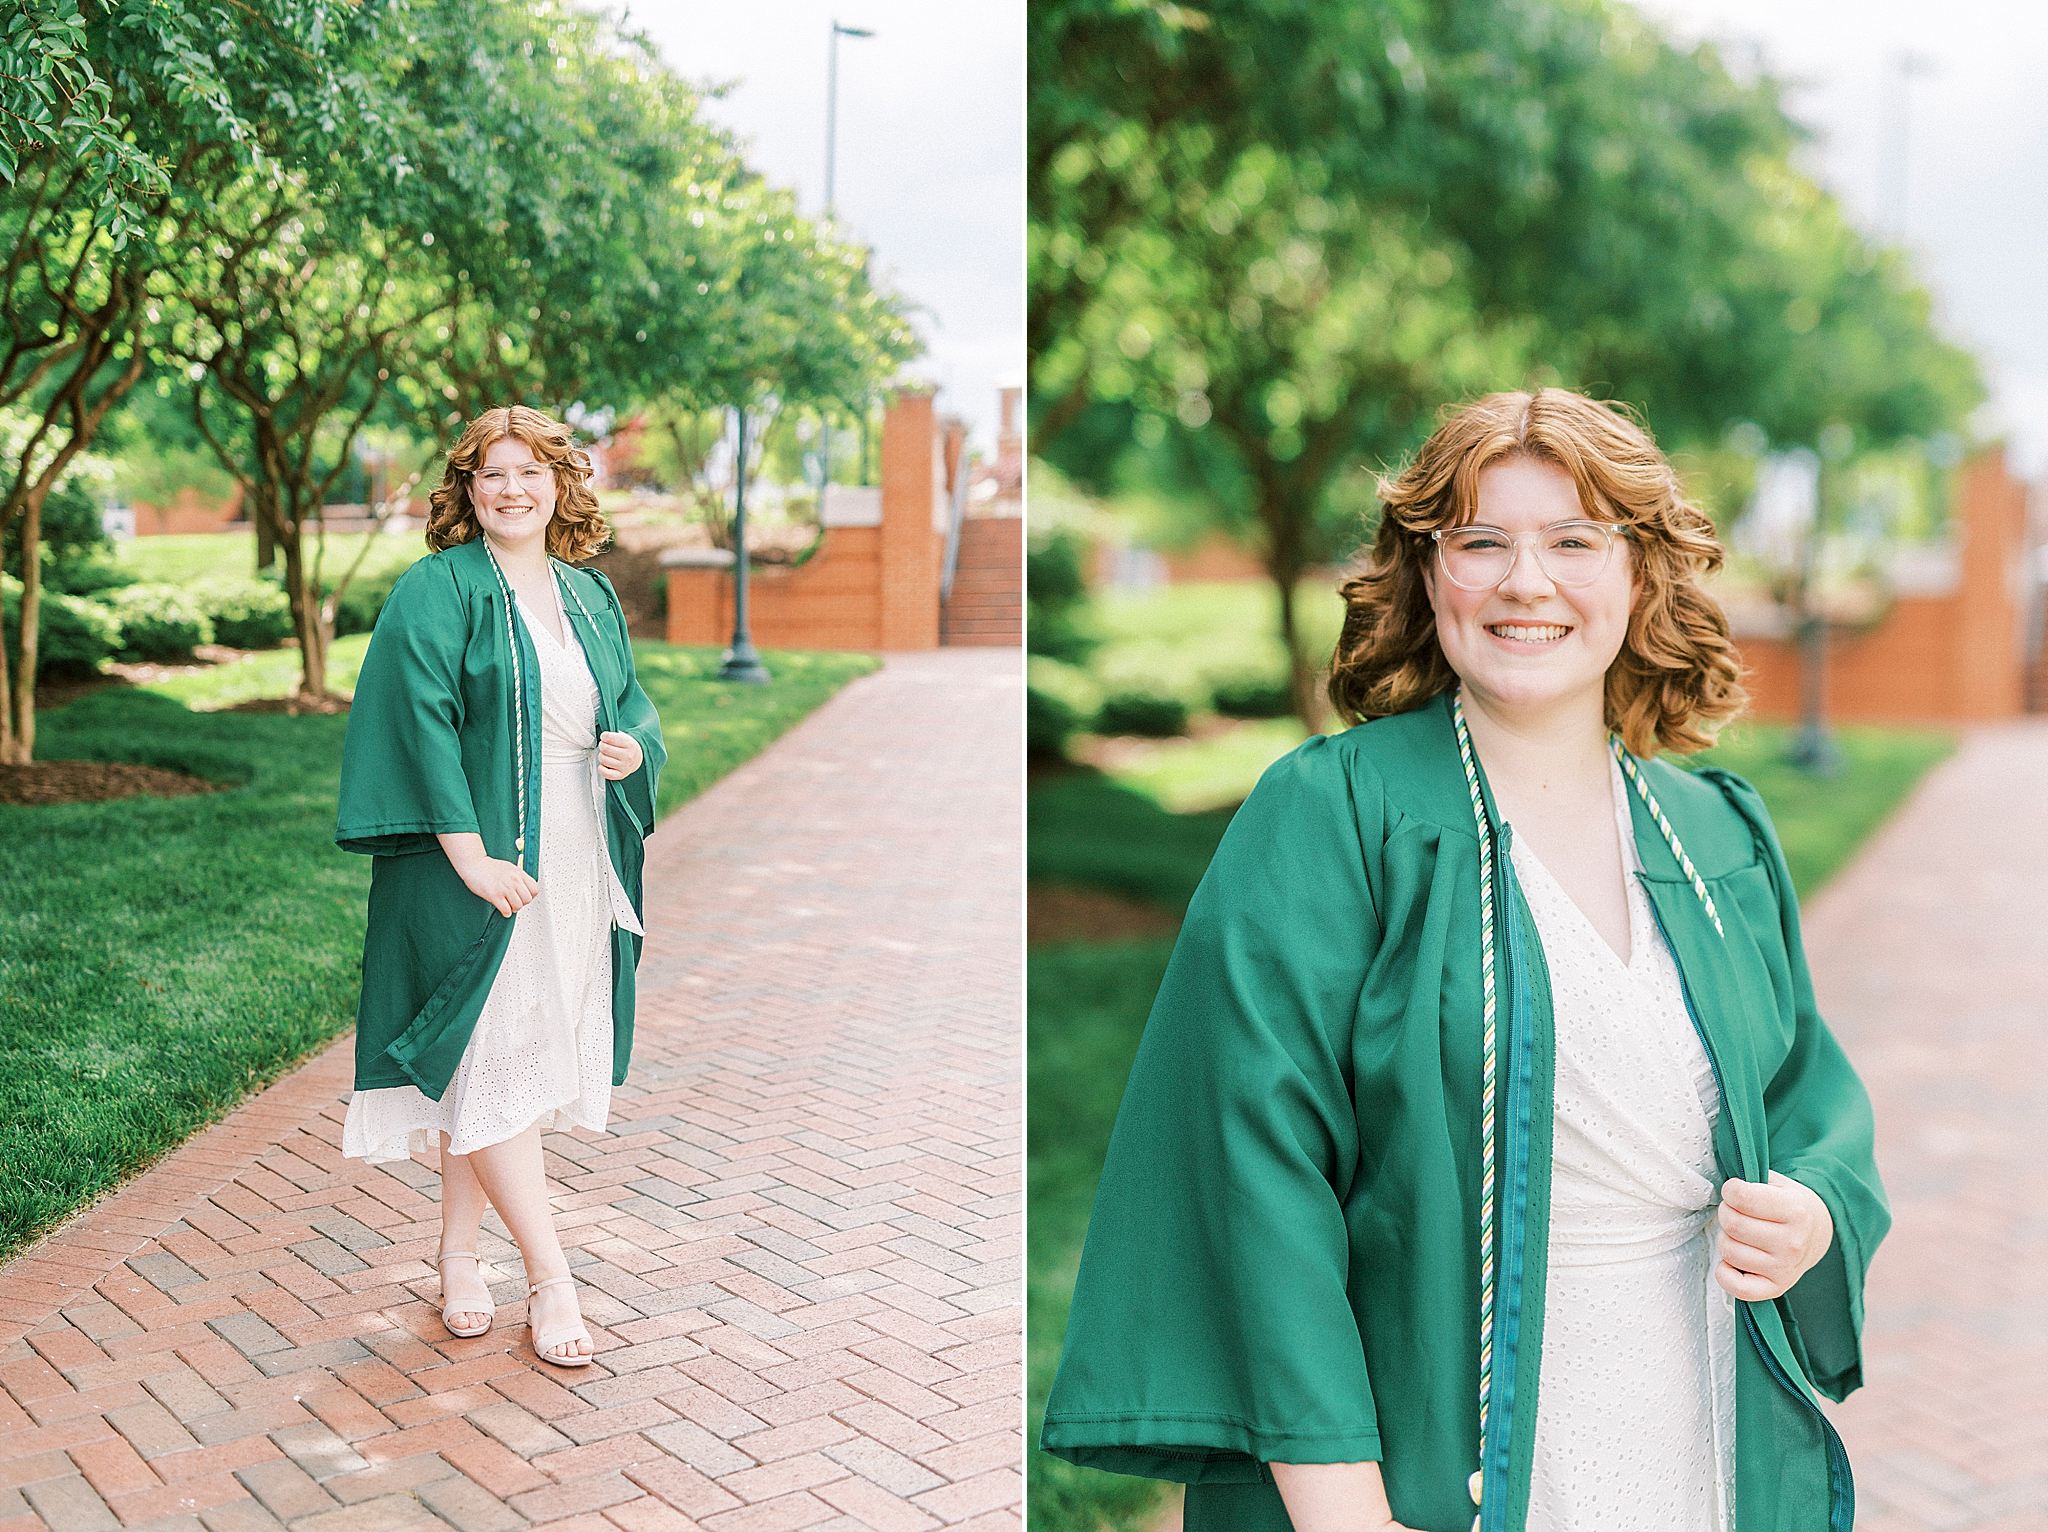 UNCC graduate poses on campus in green robe